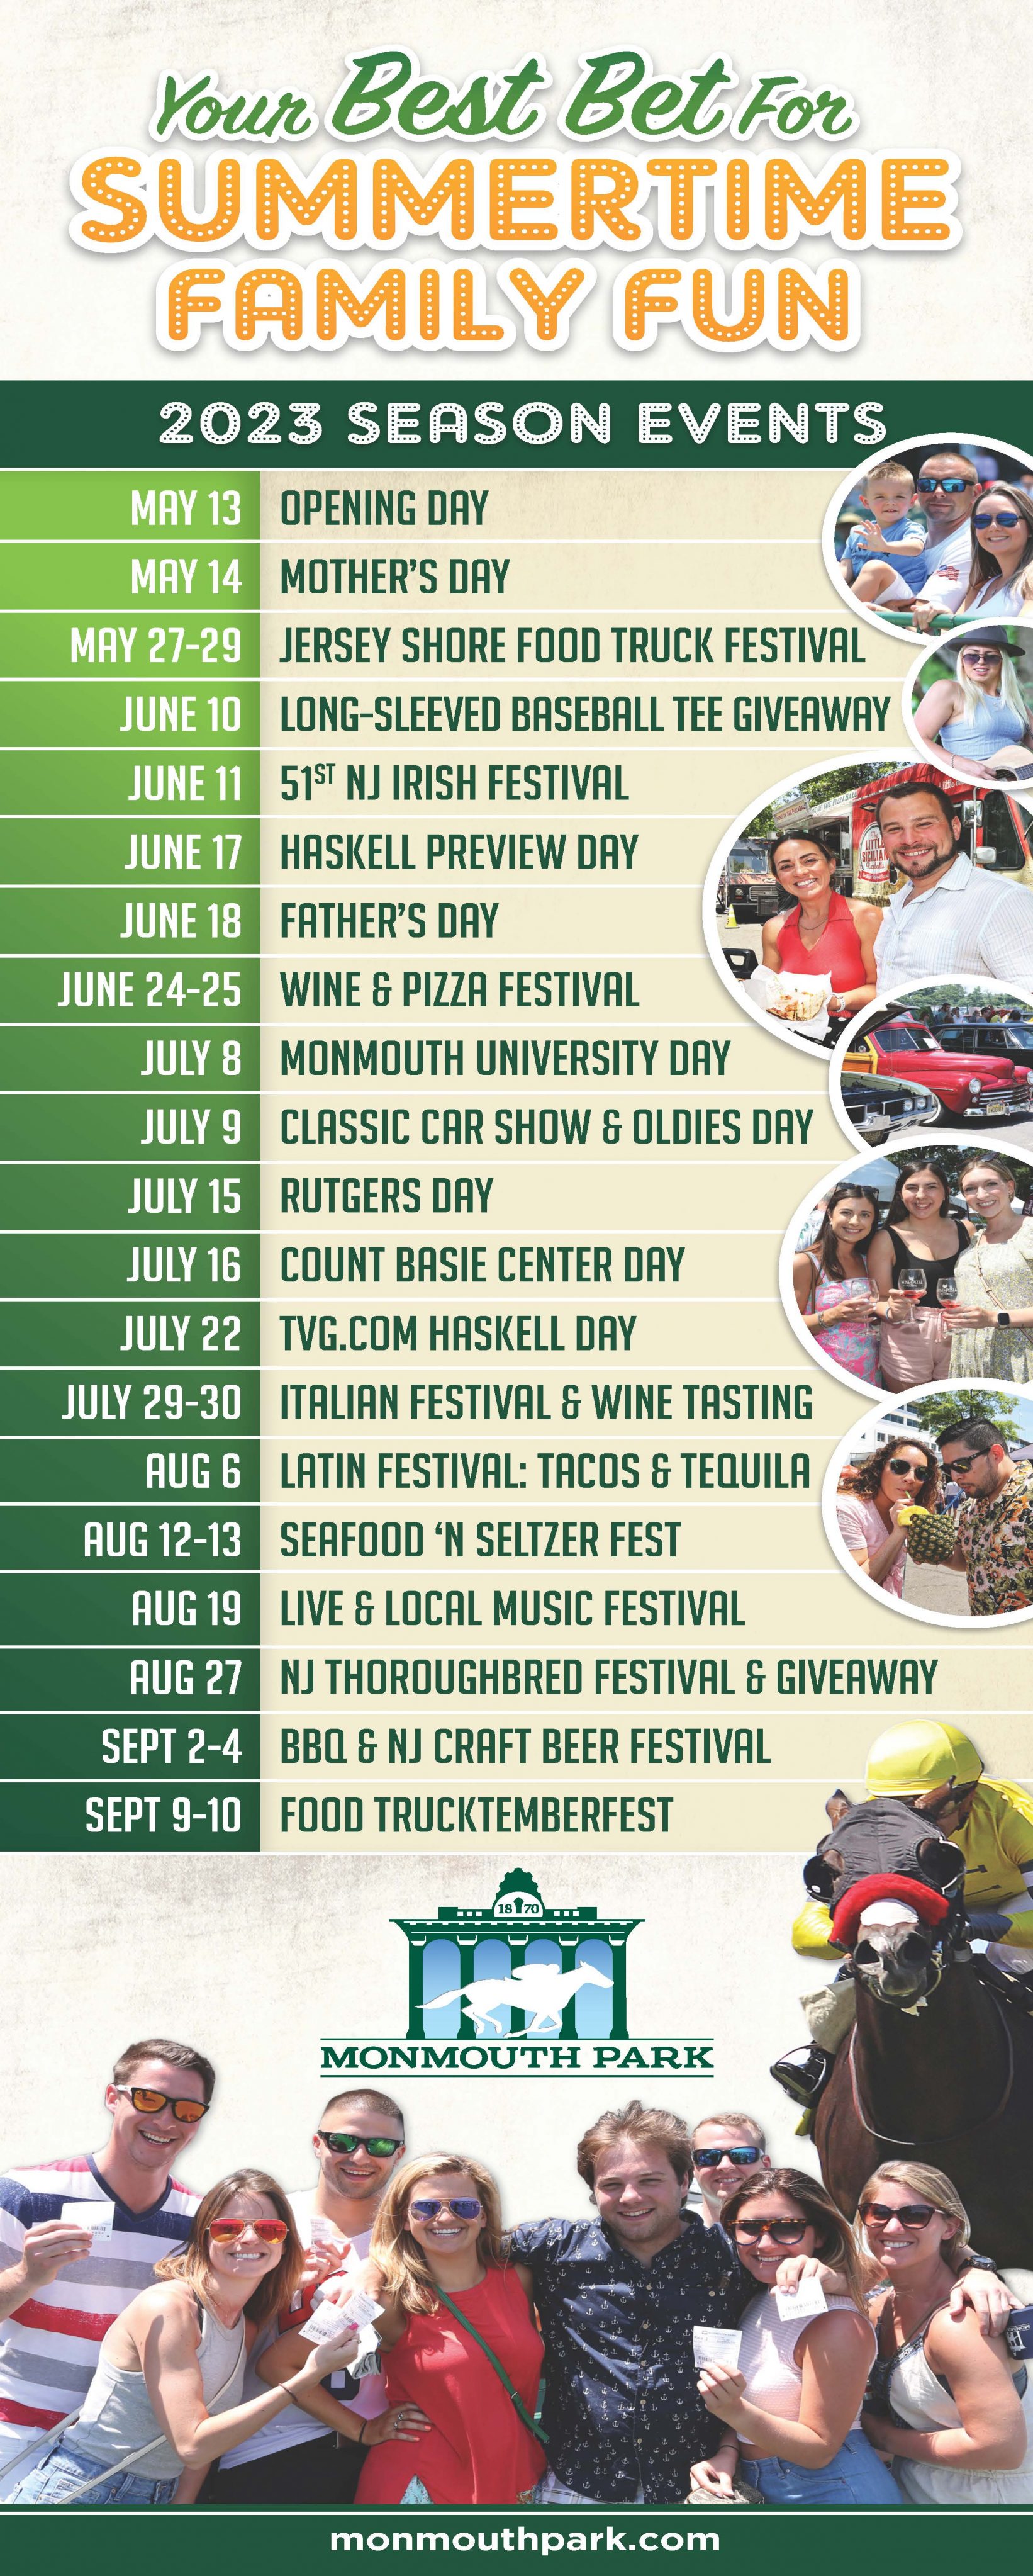 Full Promotional Schedule On Tap This Summer As Monmouth Park Kicks Off